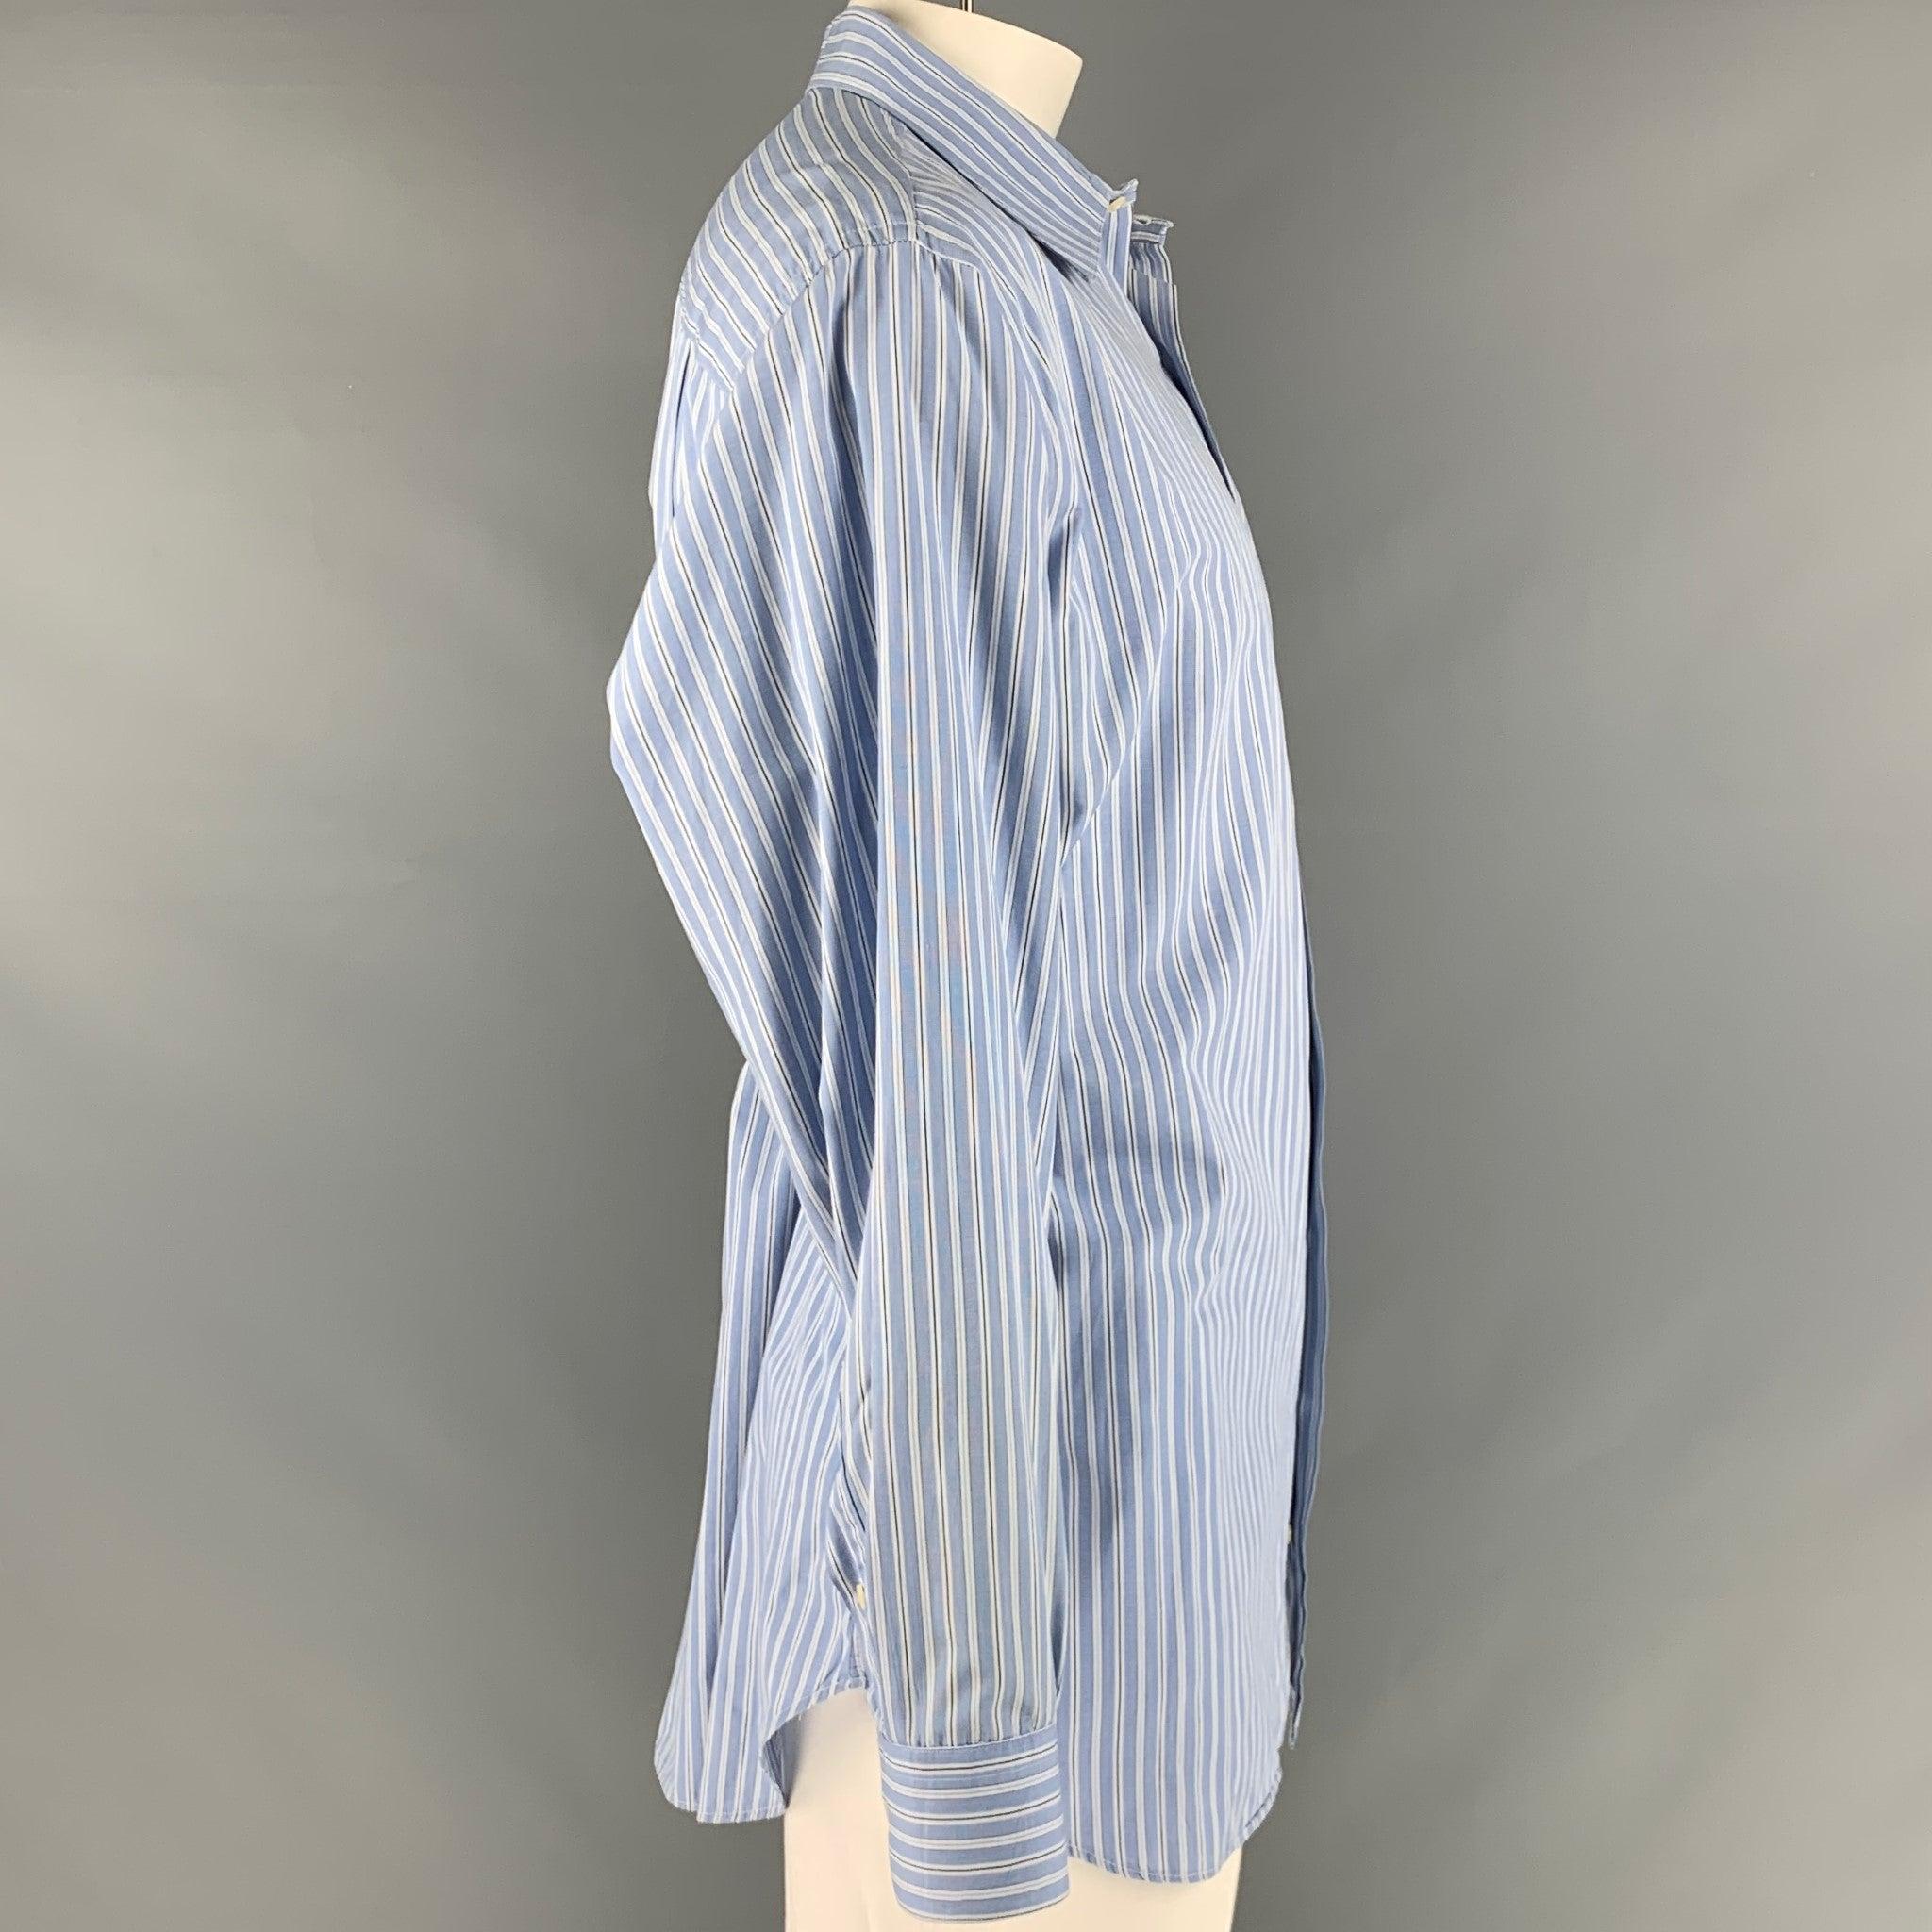 GITMAN BROS Size XL Blue White Stripe Cotton Long Sleeve Shirt In Good Condition For Sale In San Francisco, CA